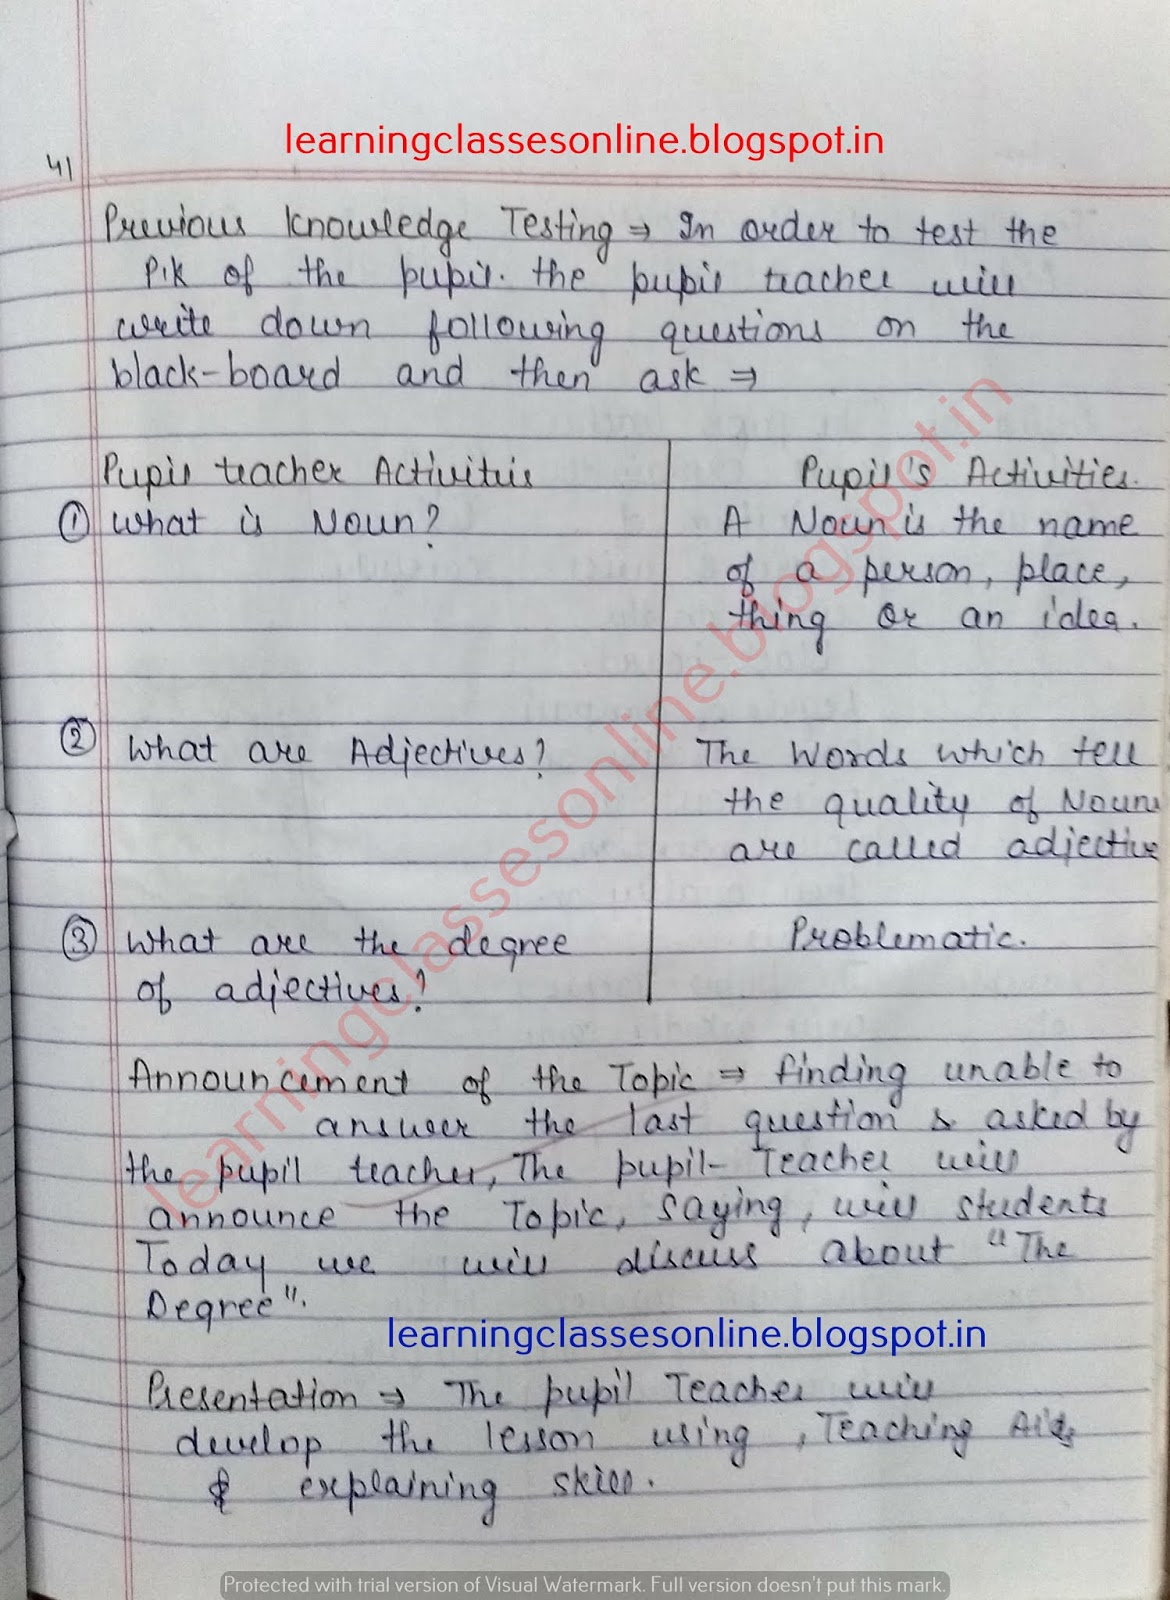 lesson plan for english class 2 cbse,